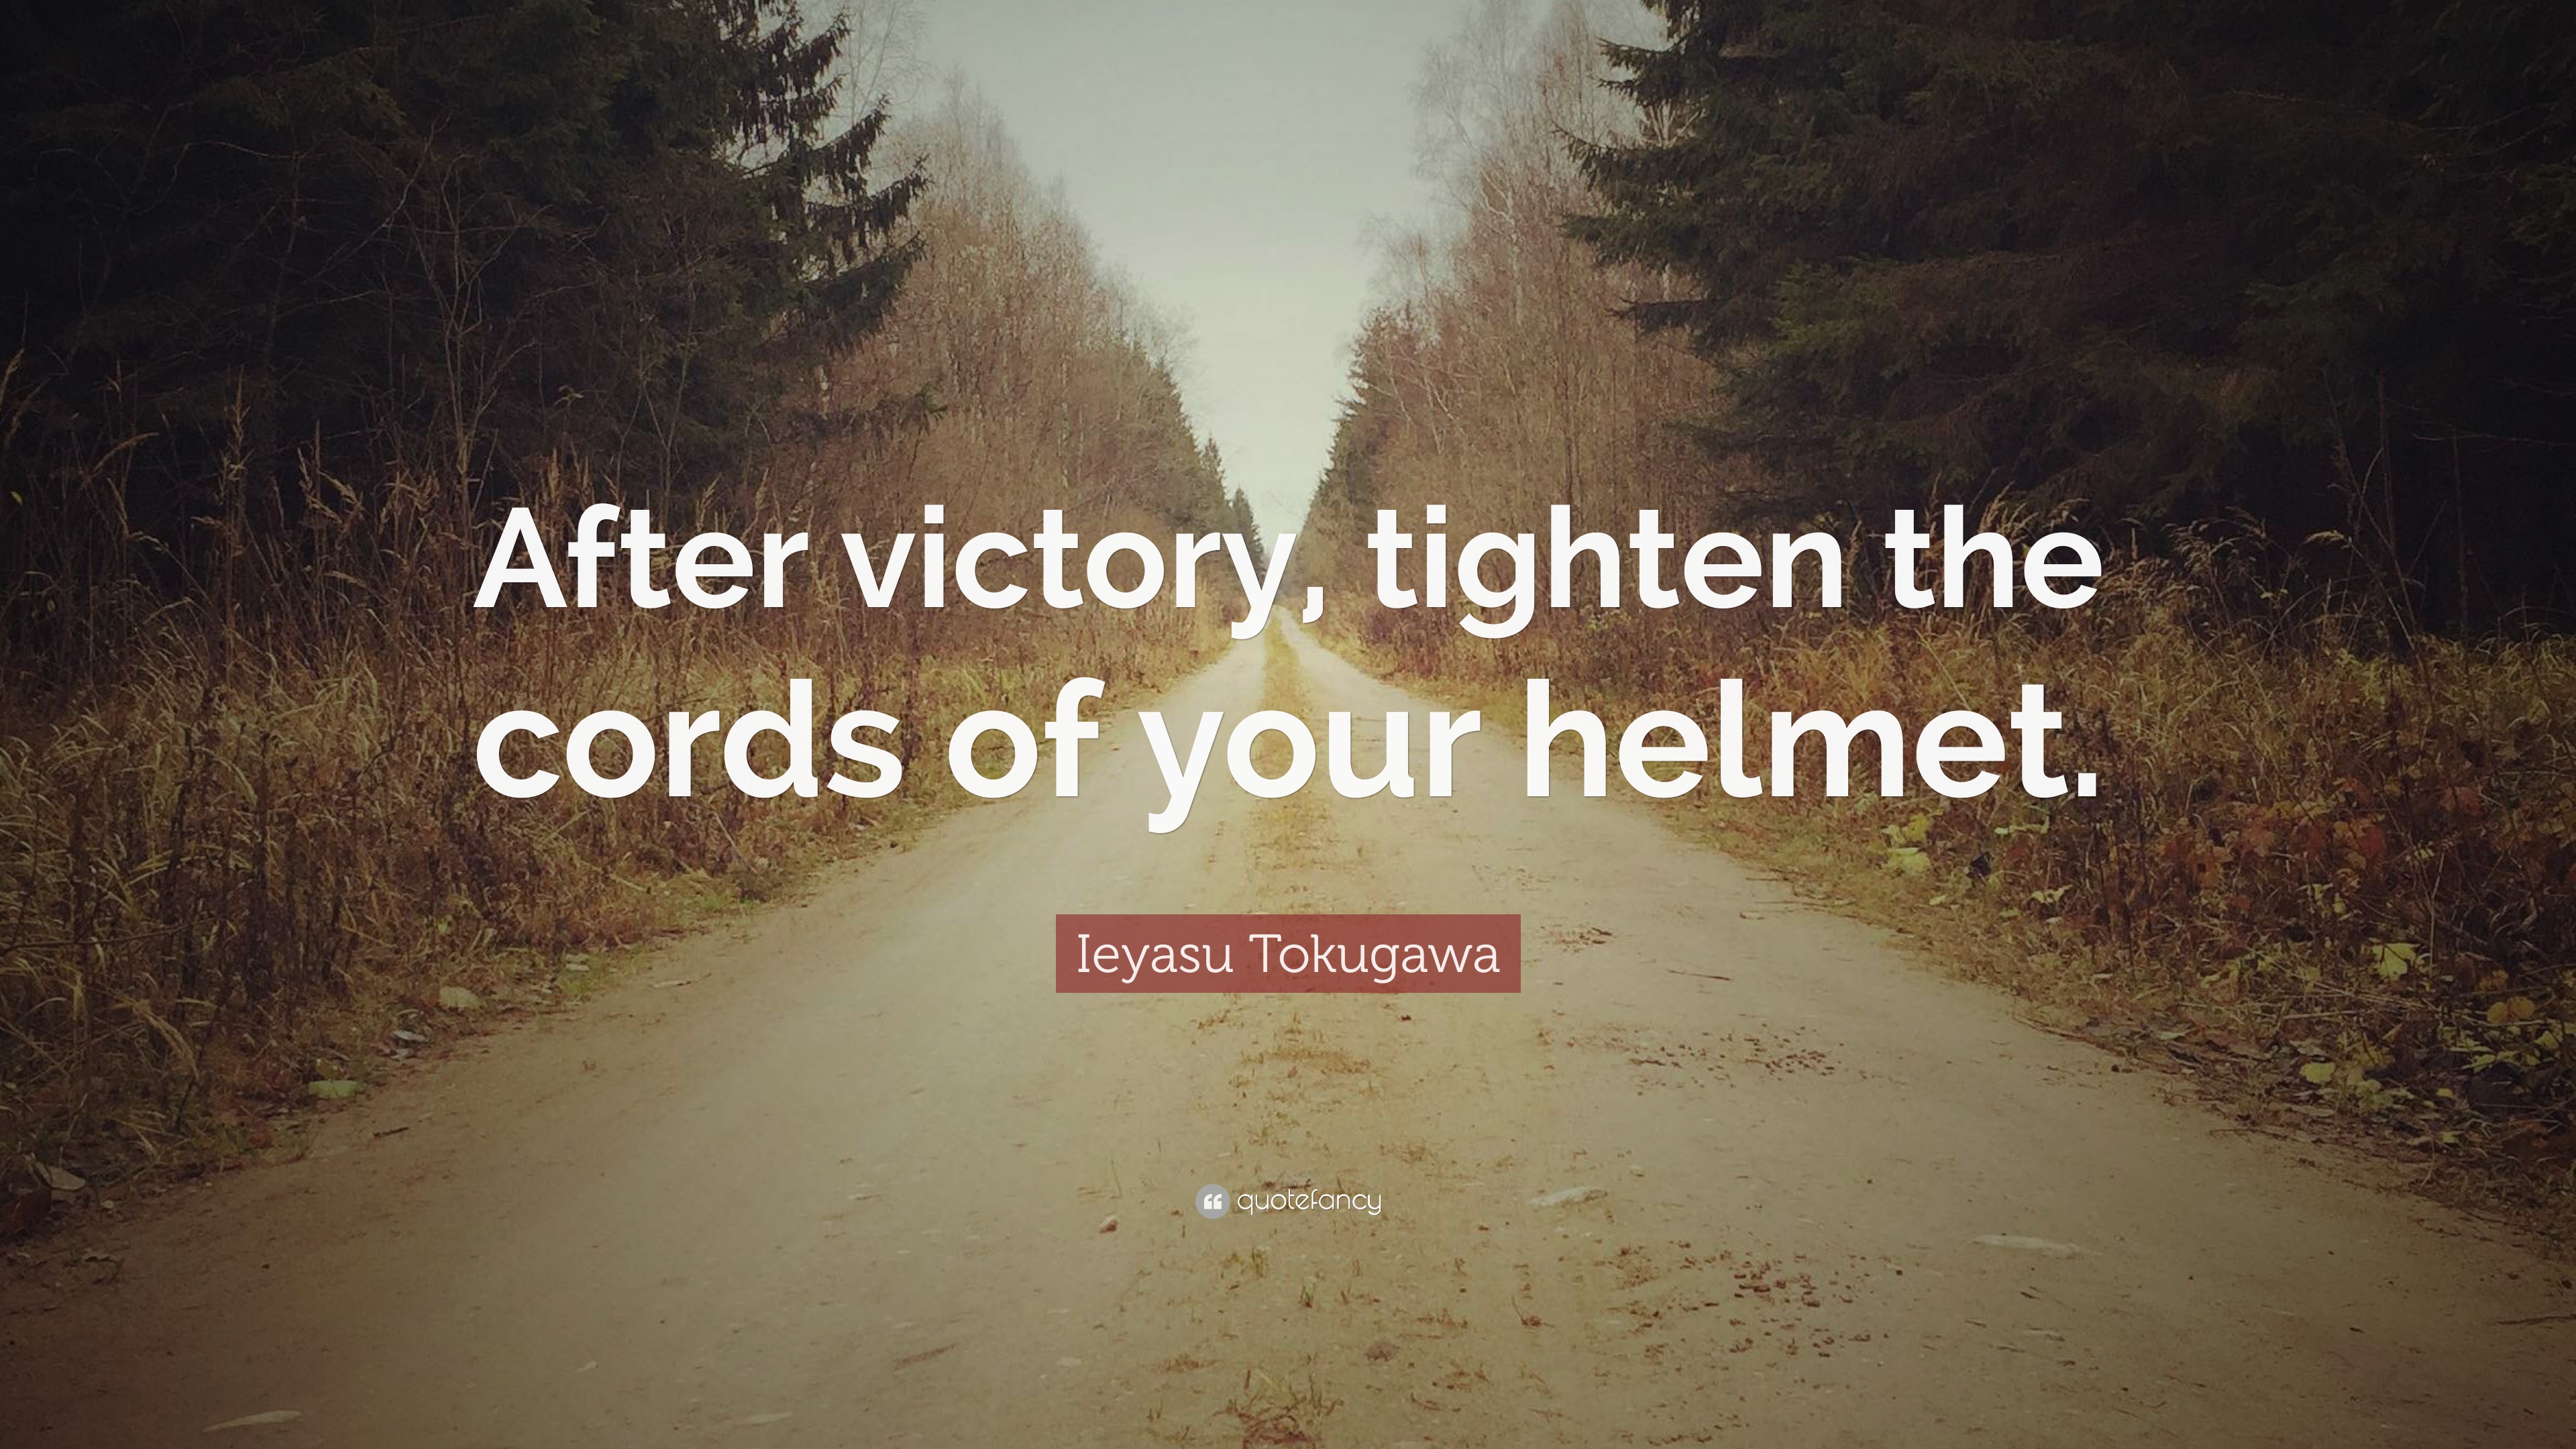 after victory, tighten the cords of your helmet. leyasy tokugawa